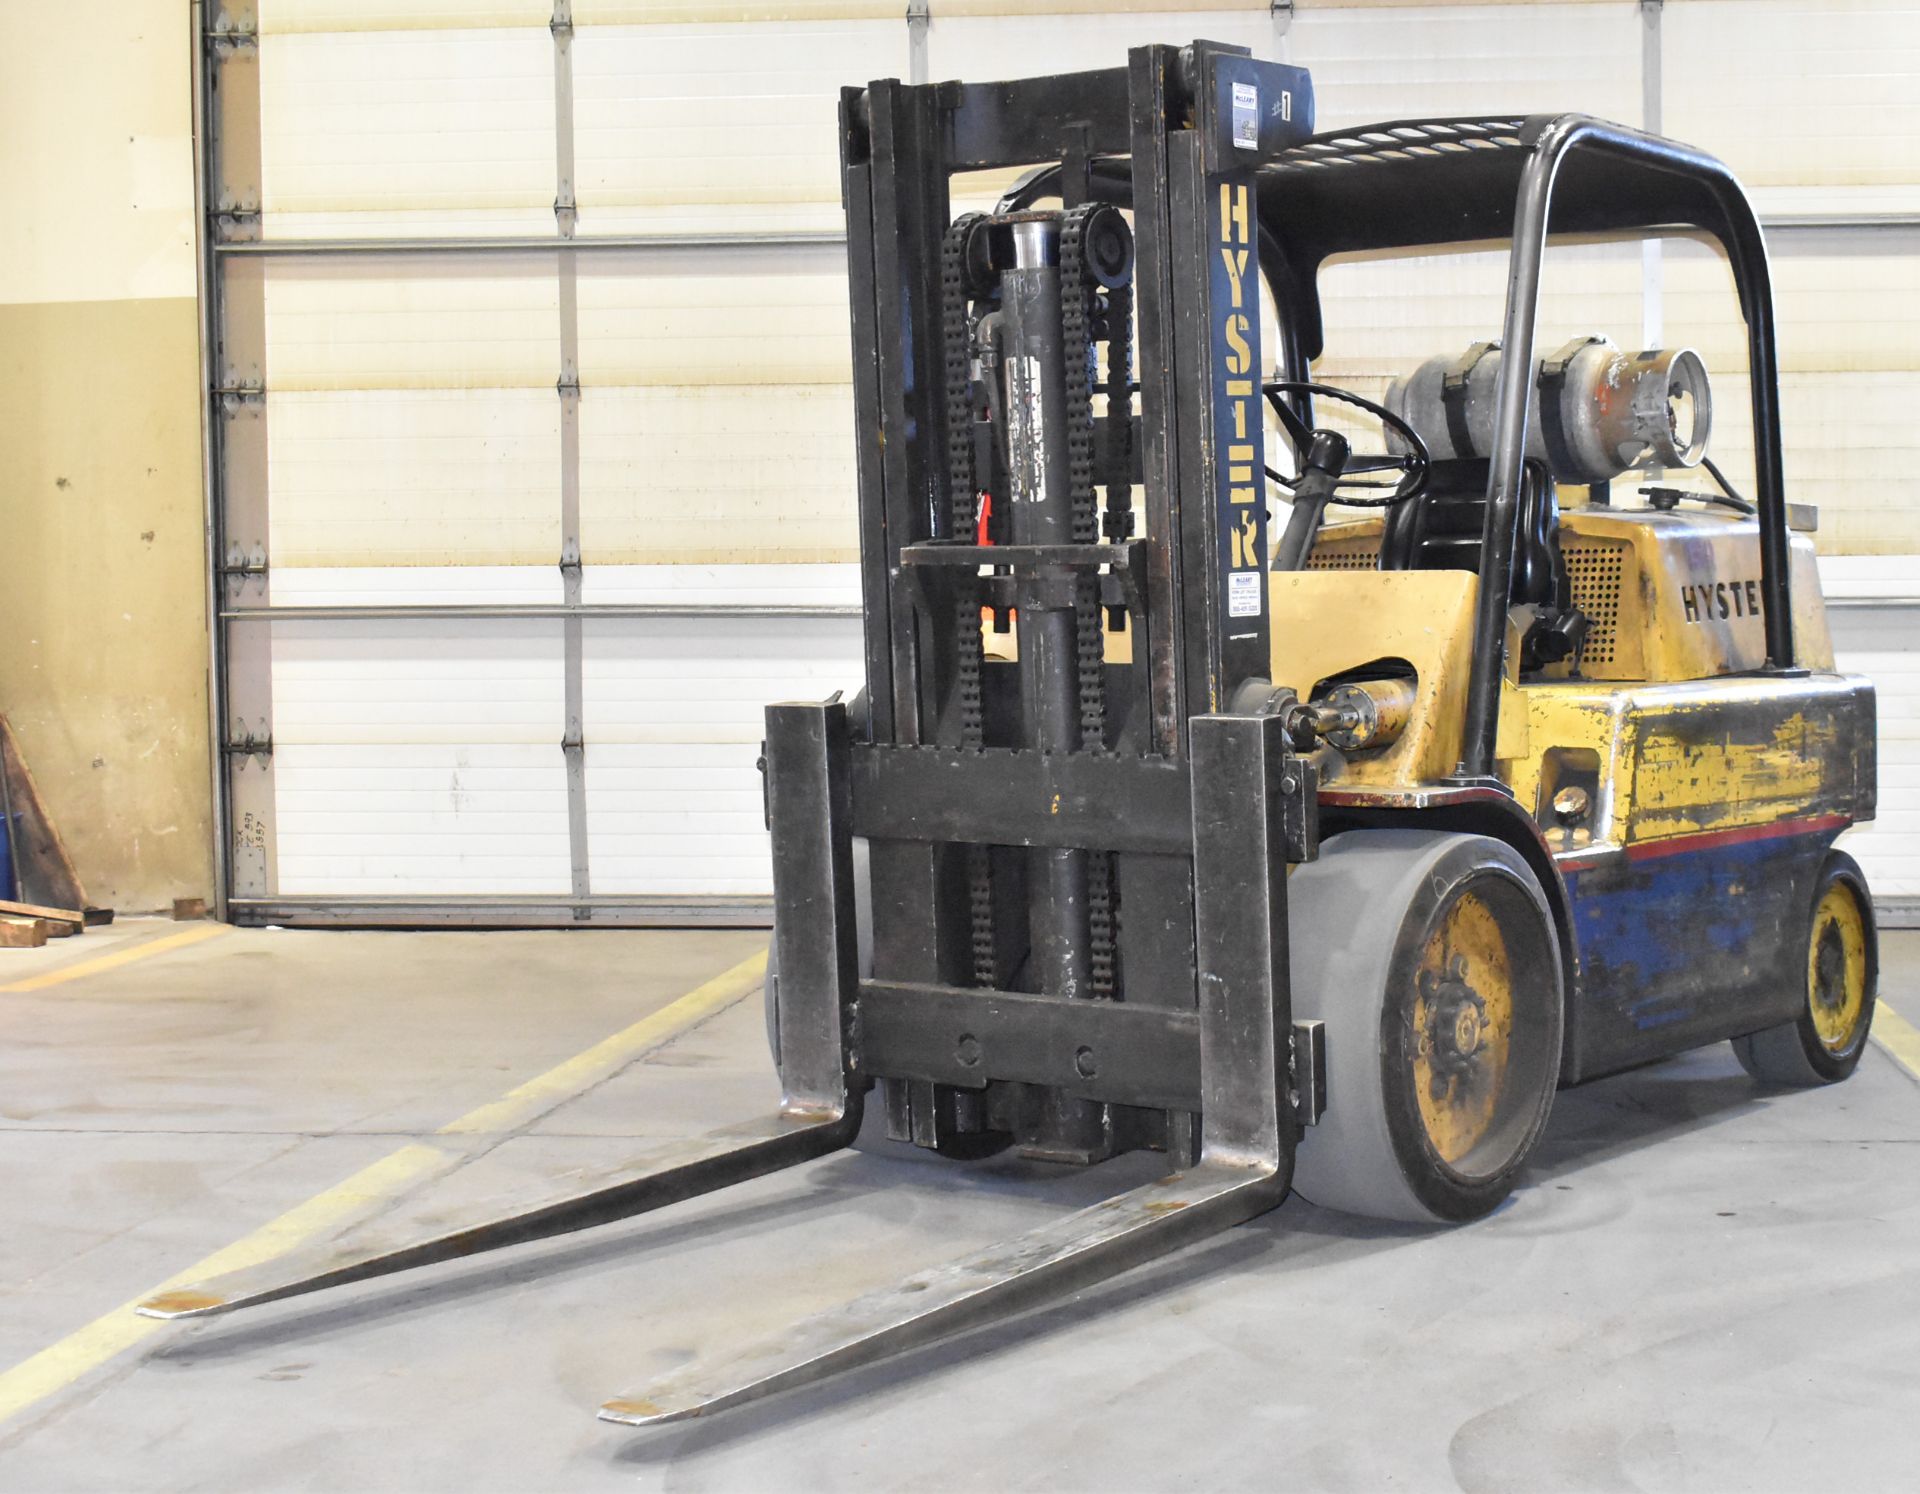 HYSTER S150A 15,000 LB. CAPACITY LPG FORKLIFT WITH 129" MAX. LIFT HEIGHT, 2-STAGE MAST, SOLID TIRES, - Image 5 of 18